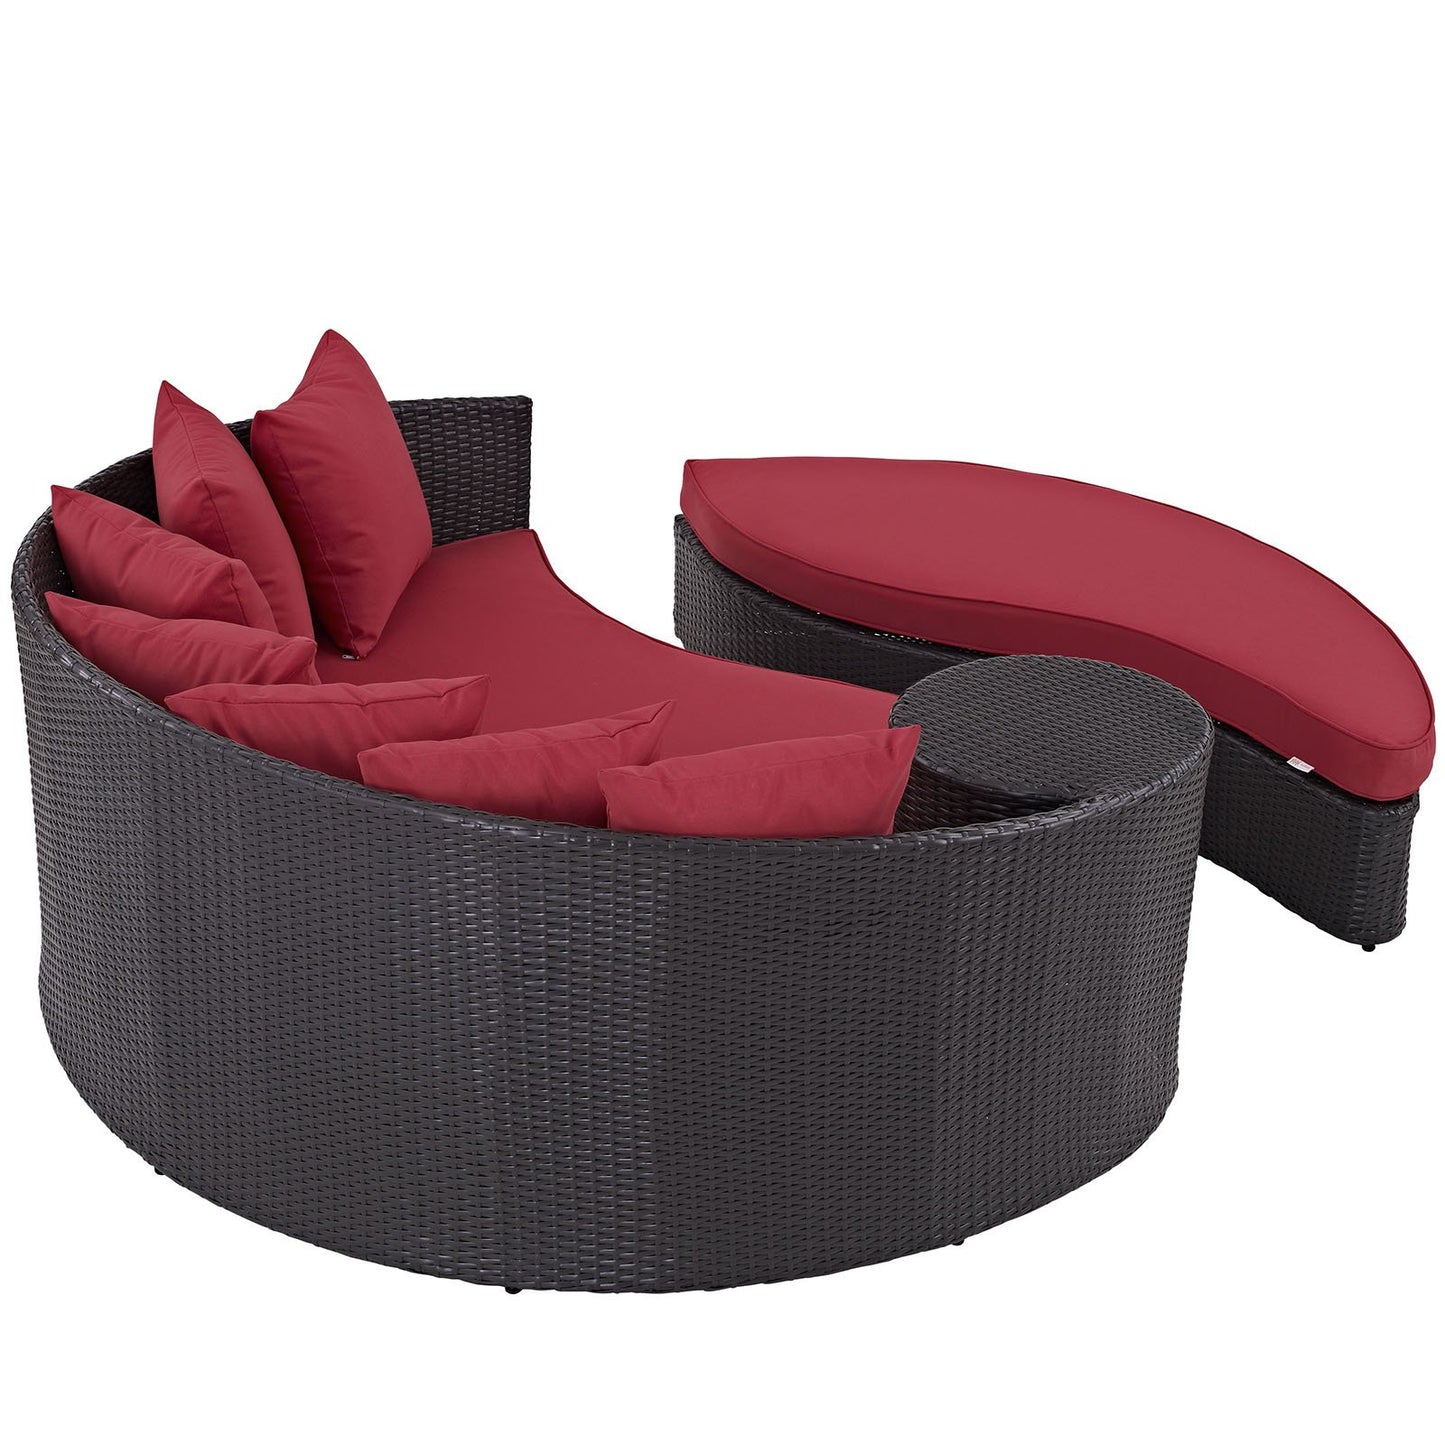 Modway Convene Outdoor Wicker Sectional Daybed, Espresso/Red